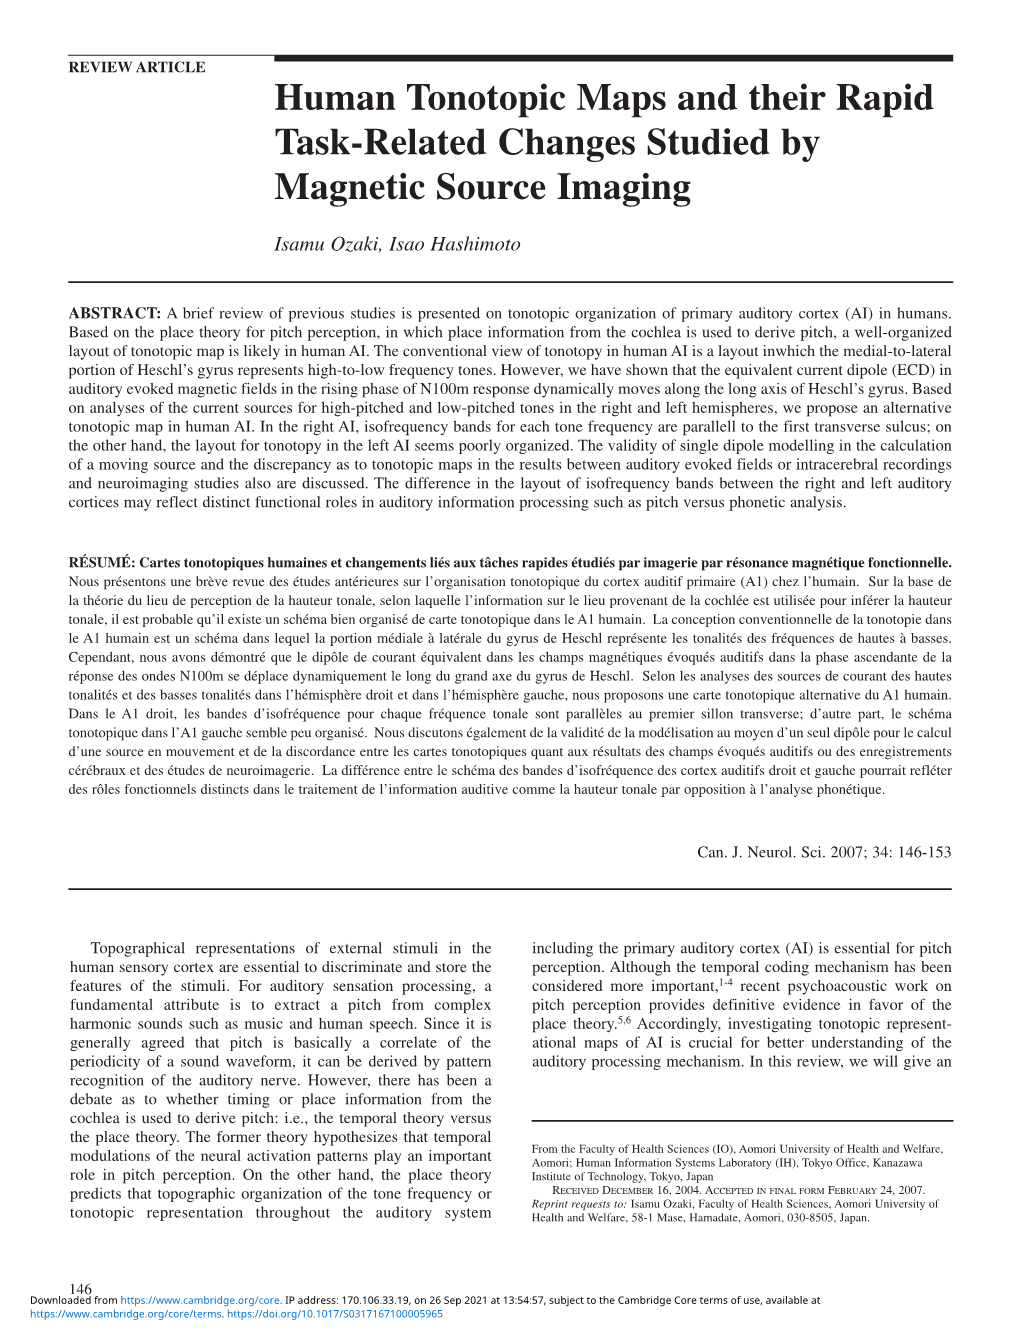 Human Tonotopic Maps and Their Rapid Task-Related Changes Studied by Magnetic Source Imaging